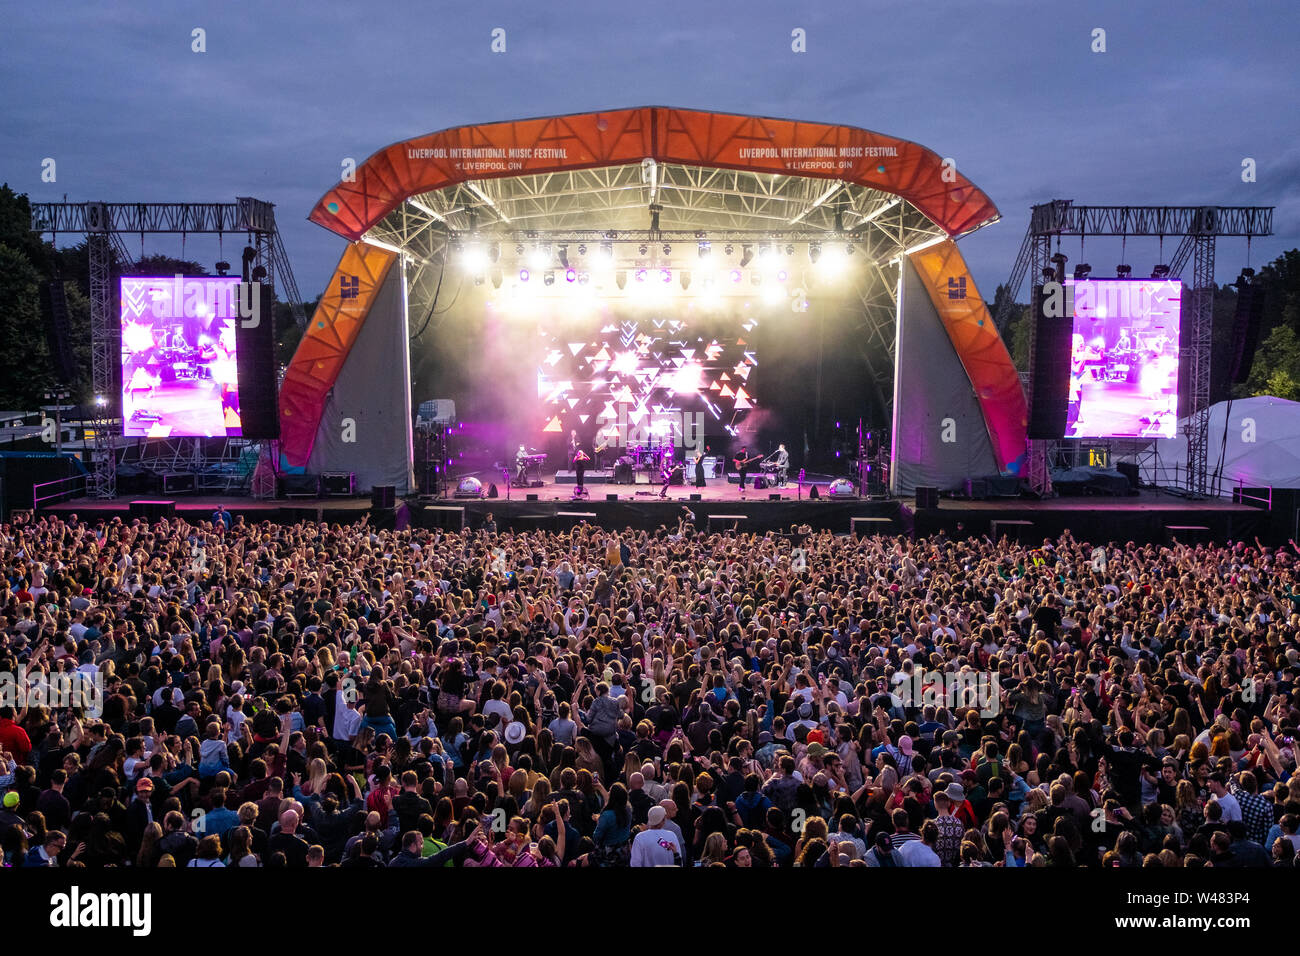 Liverpool, UK. July 20, 2019. Nile Rodgers & Chic performing in front of a sell-out crowd at the Liverpool International Music Festival (LIMF) in Sefton Park in Liverpool, north west England on Saturday, July 20, 2019. Credit: Christopher Middleton/Alamy Live News Stock Photo